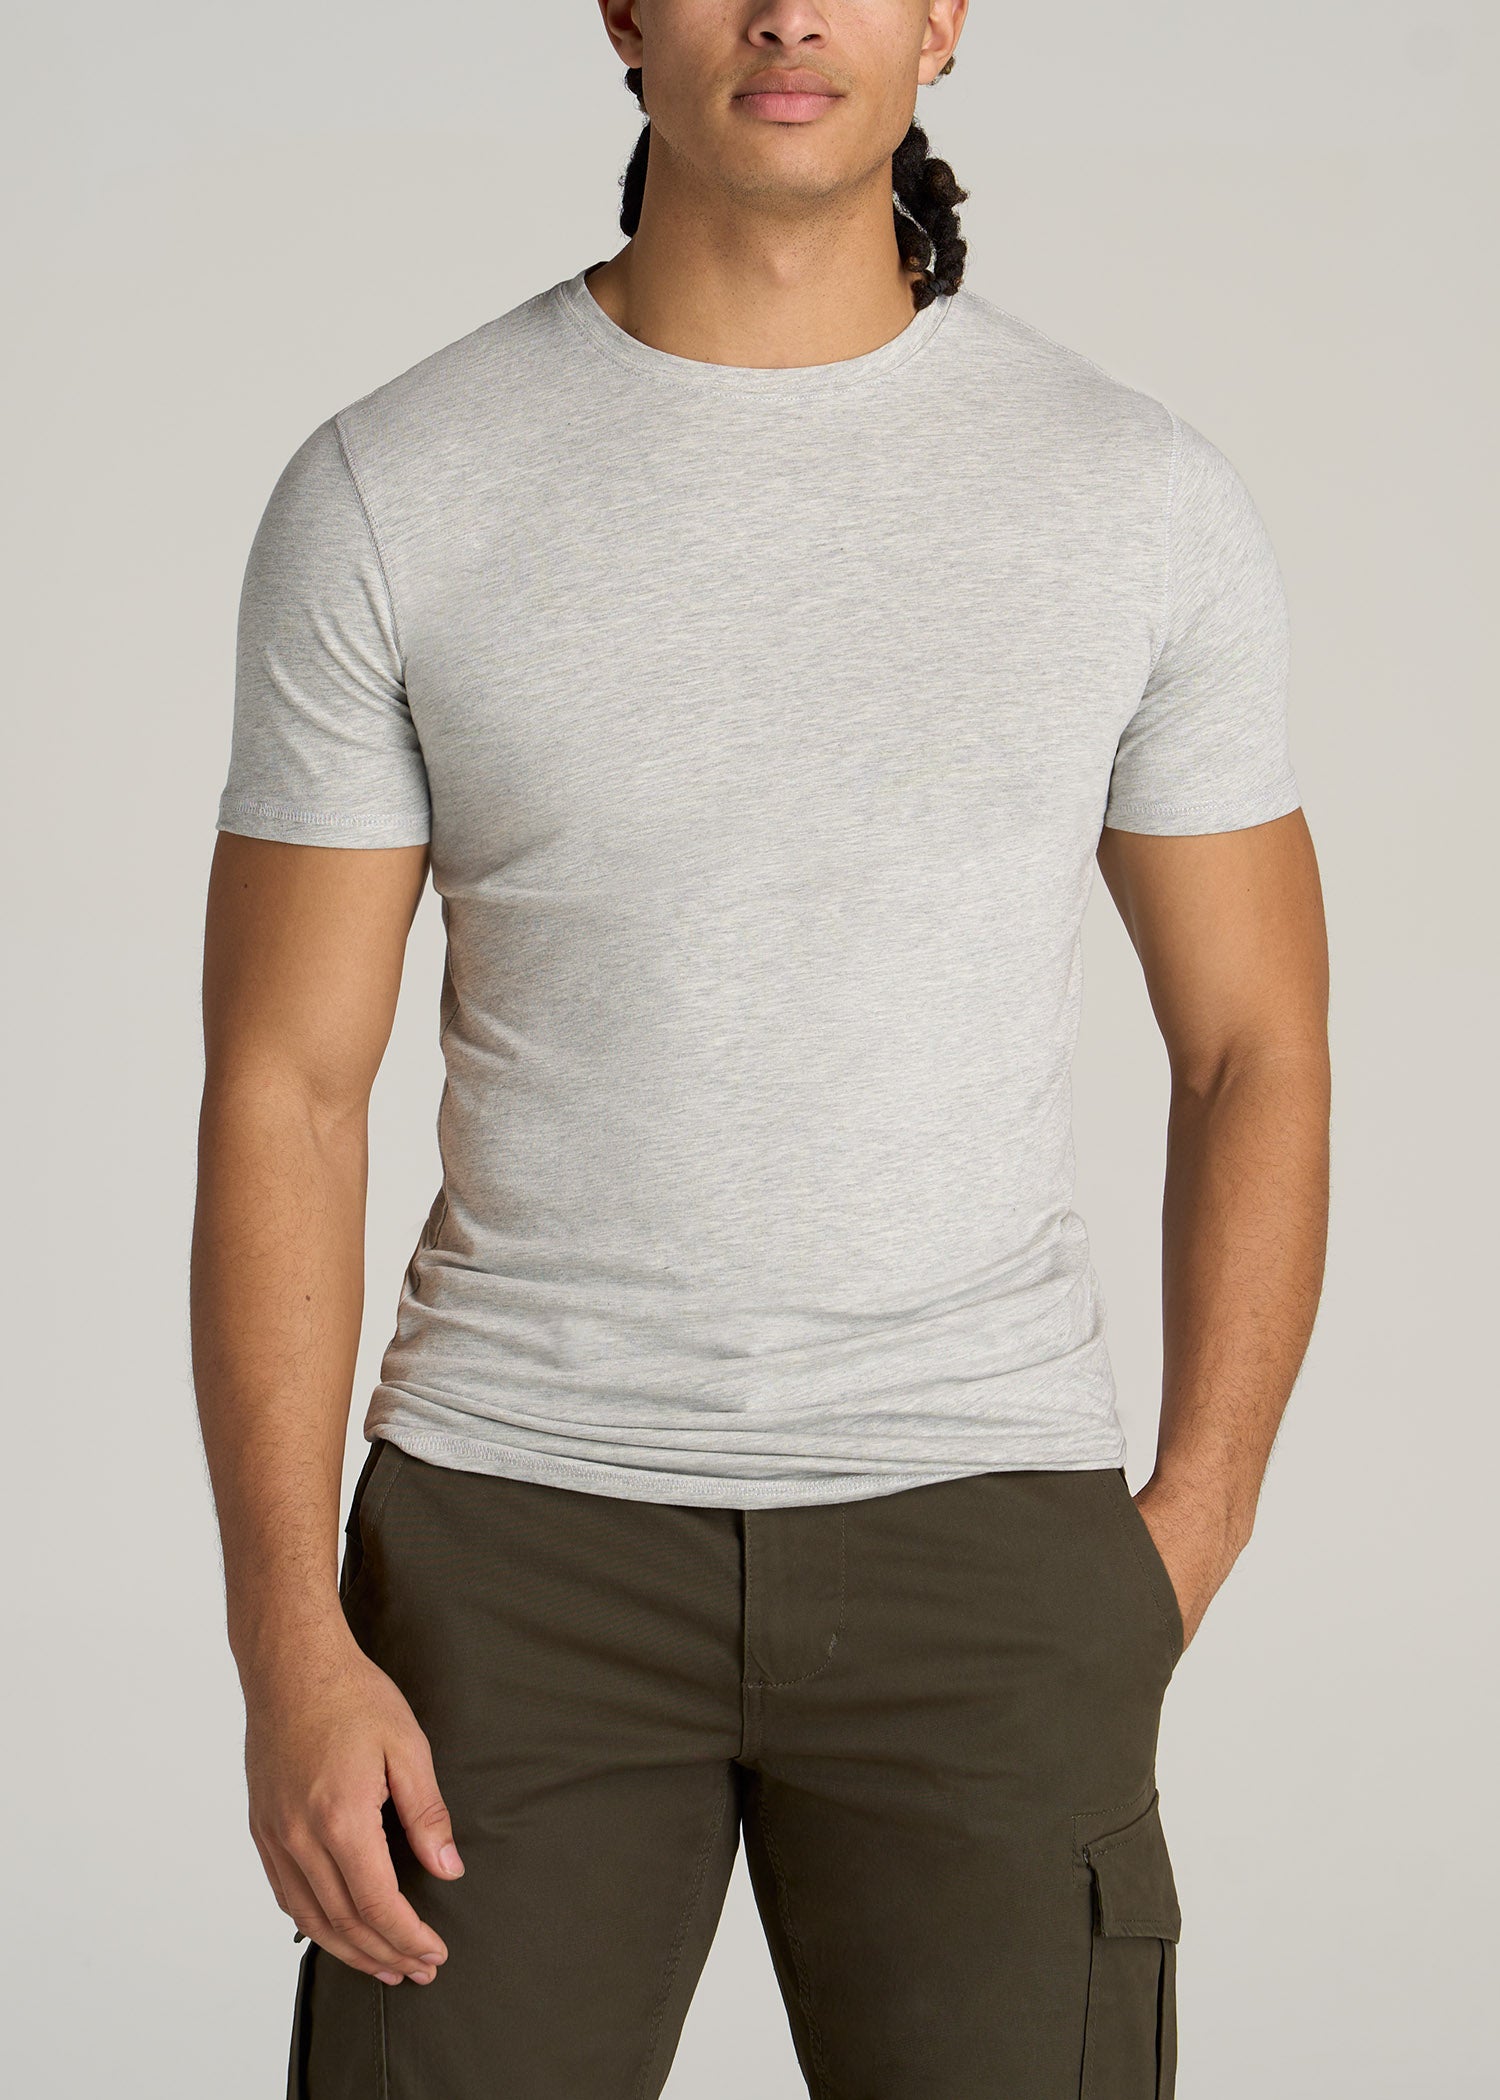    American-Tall-Men-Essential-SLIM-FIT-Crew-Neck-Tees-Grey-Mix-front